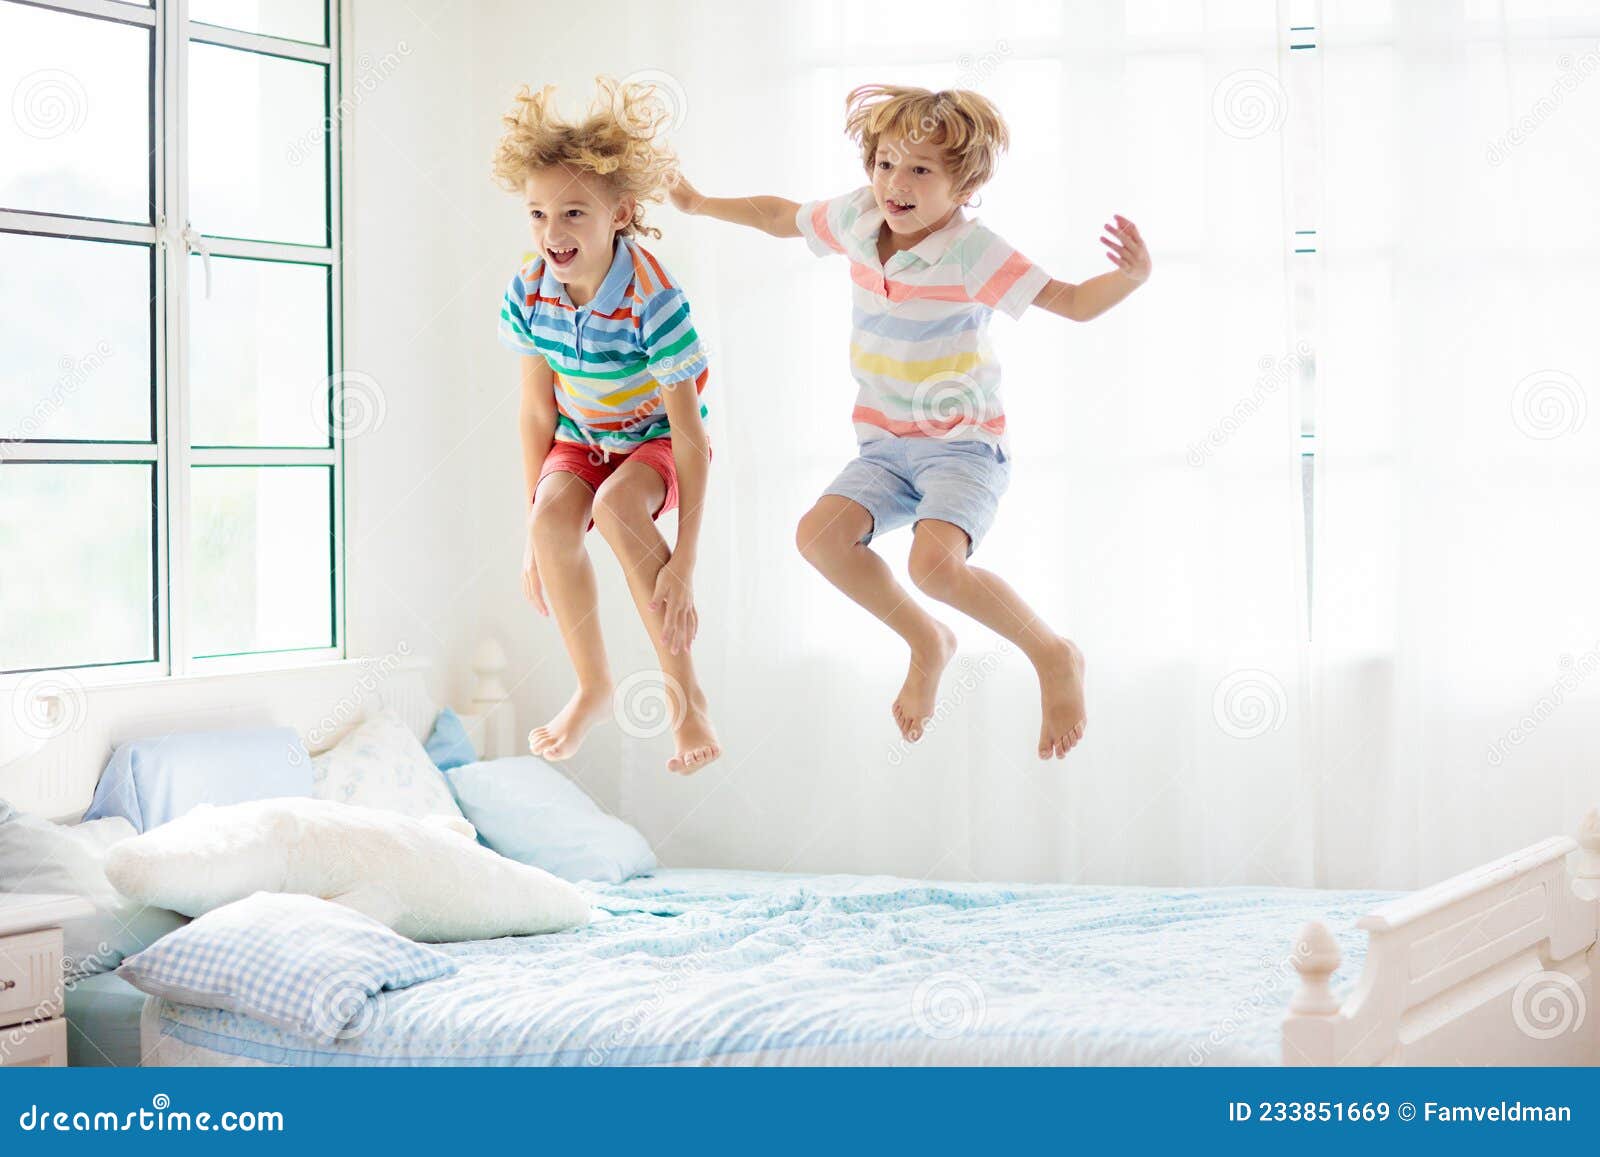 Child Playing In Bed. Kids Room. Boy At Home Stock Image - Image Of Little,  Morning: 233851669